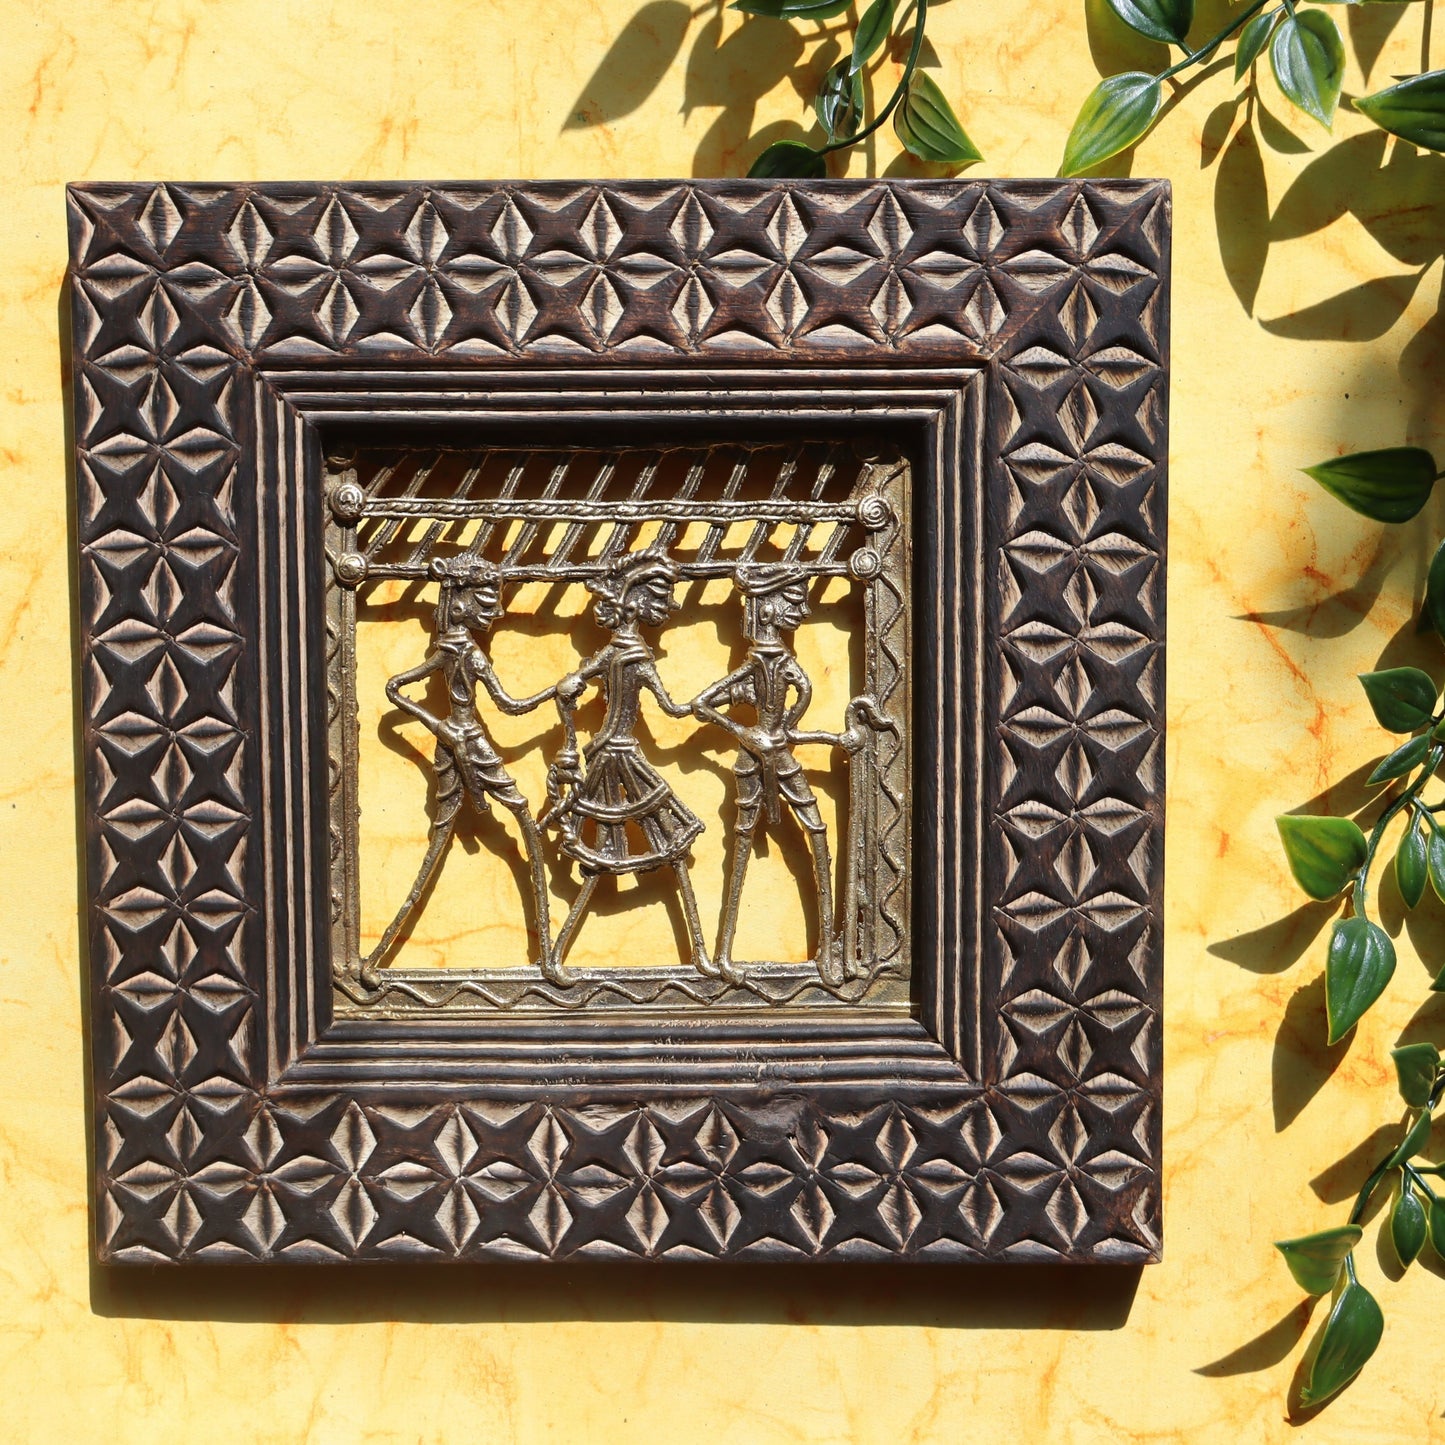 Brass Tribal Art in Wood Frame - Square, Wall Hanging, Ethnic Decor - Aksa Home Decor 